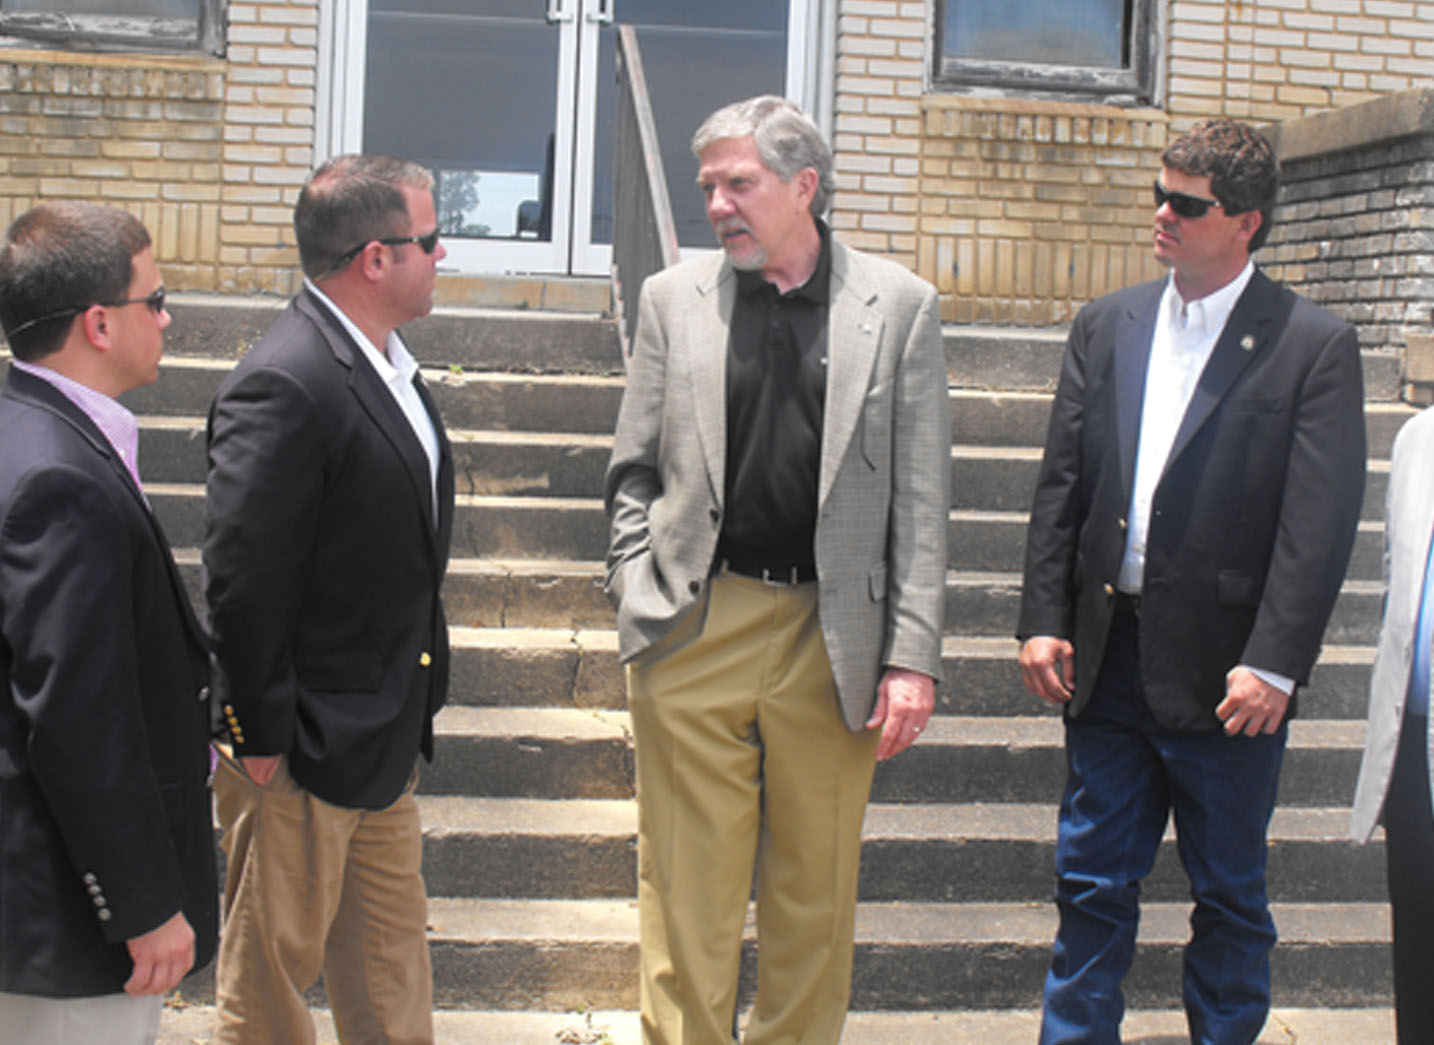 Dr. Joe West speaks with legislators in front of the H.H. Tift Building, which will undergo a complete renovation. Pictured with West are, from left, Sen. Tyler Harper, Rep. Jay Roberts, Dr. West, Rep. Sam Watson and Sen. John Crosby.